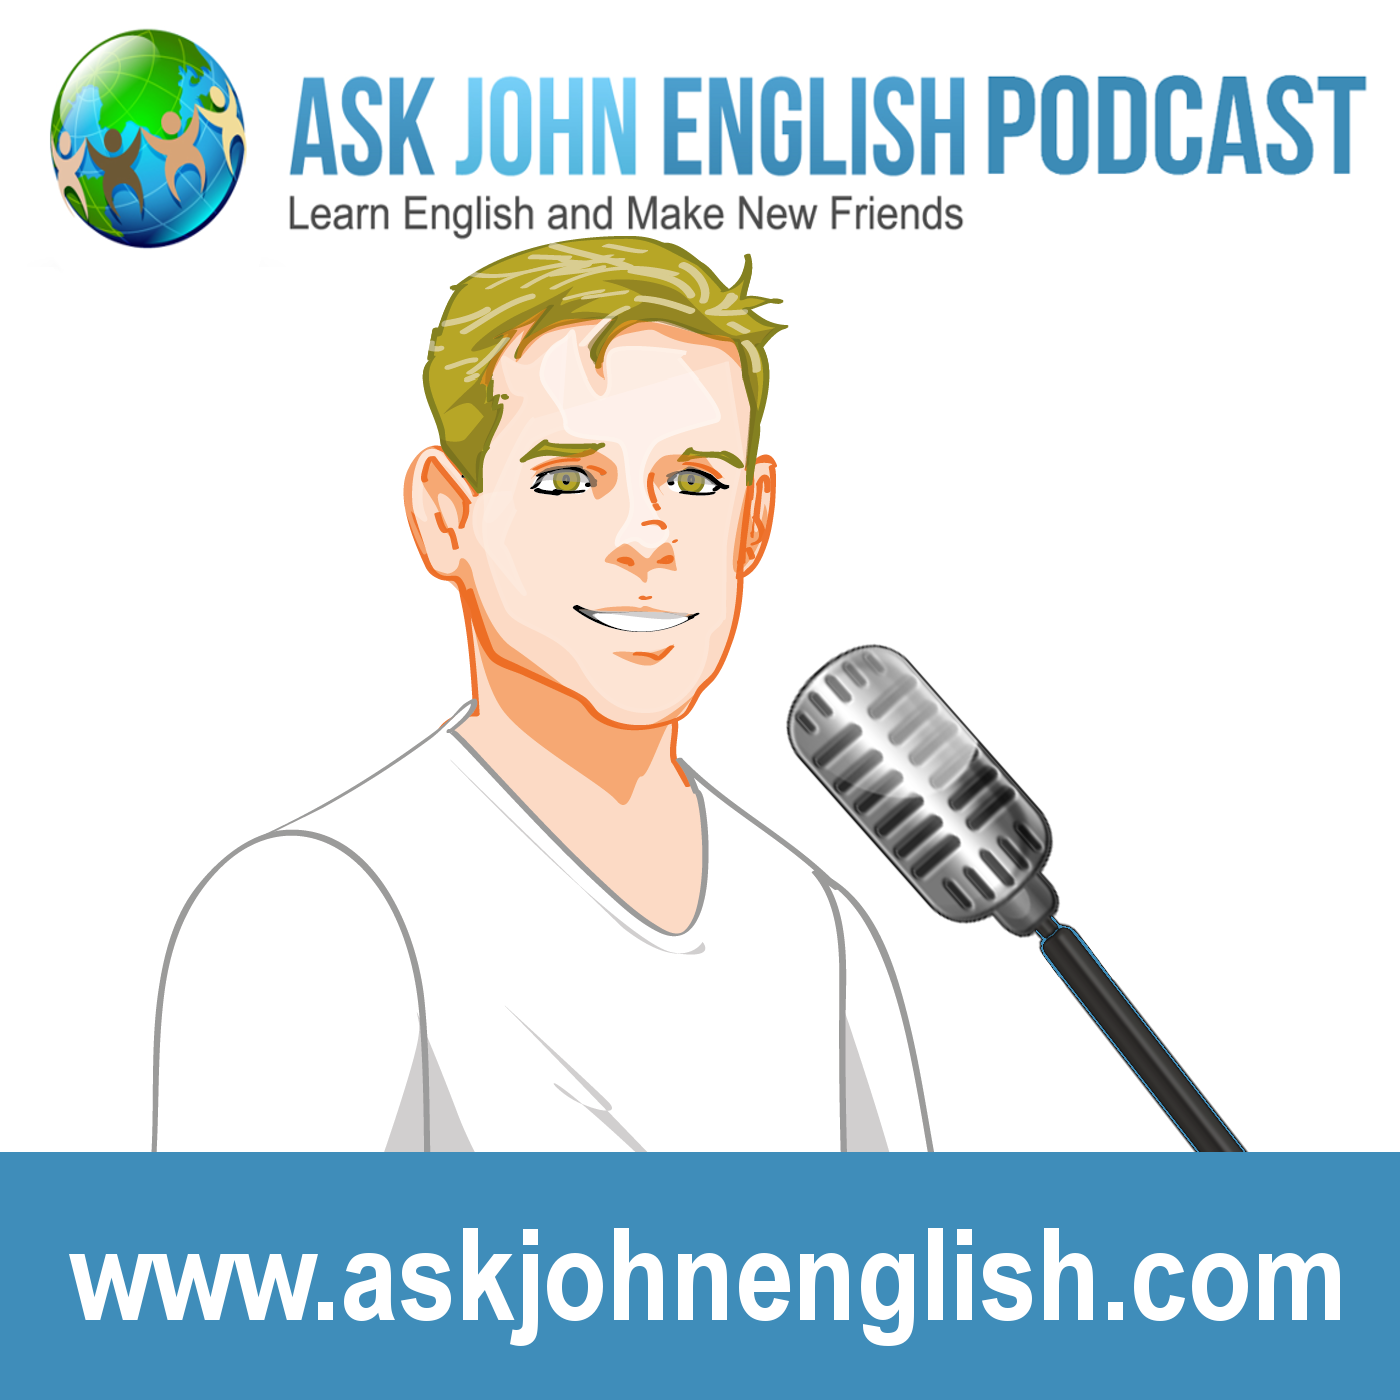 Подкасты на английском. Подкаст на английском для начинающих. Learn English Podcasts. Podcast for Learning English.